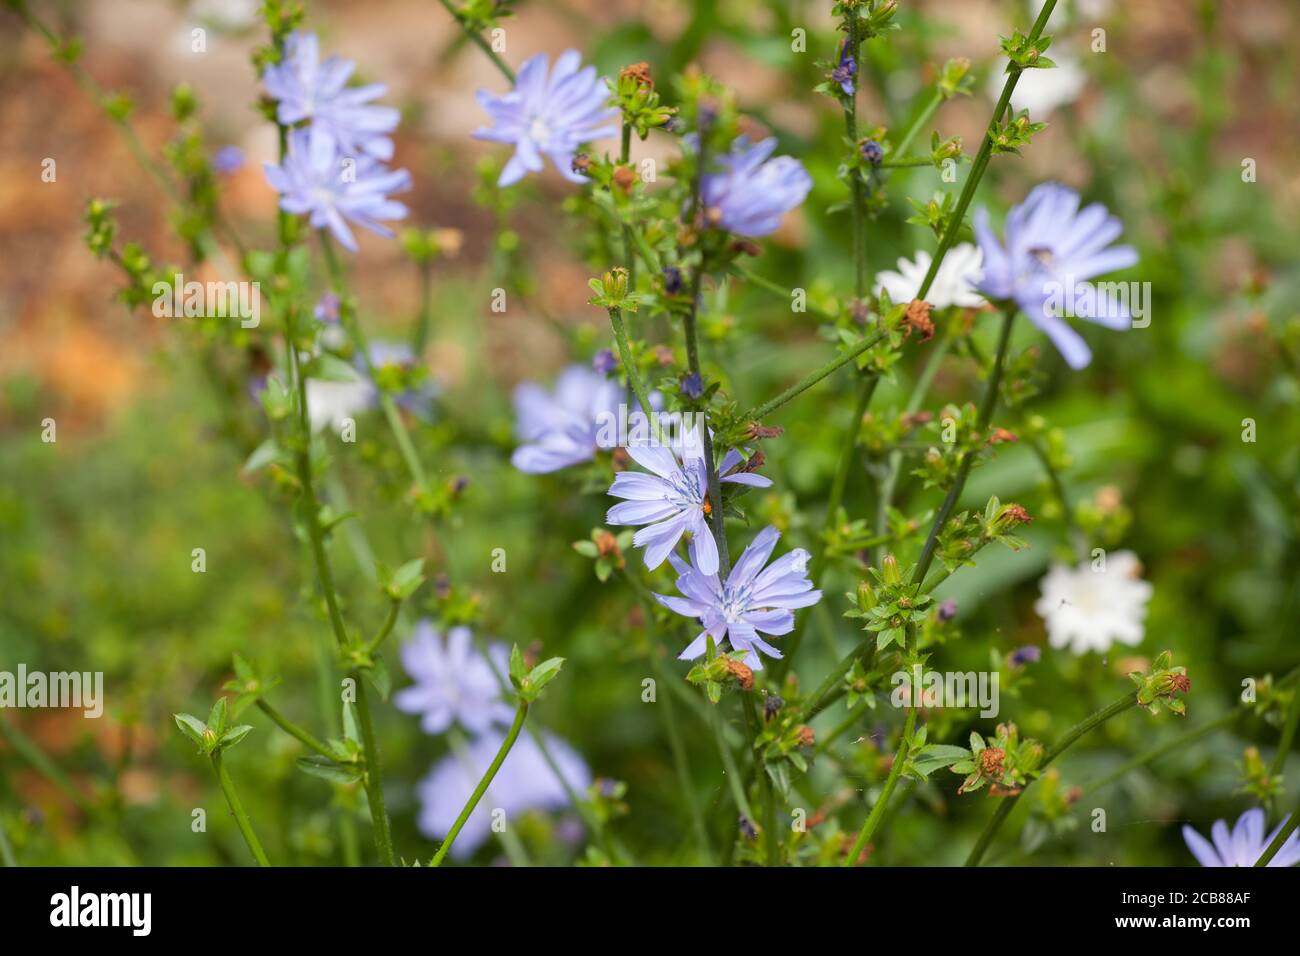 blue flowers of wild chicory plant Stock Photo